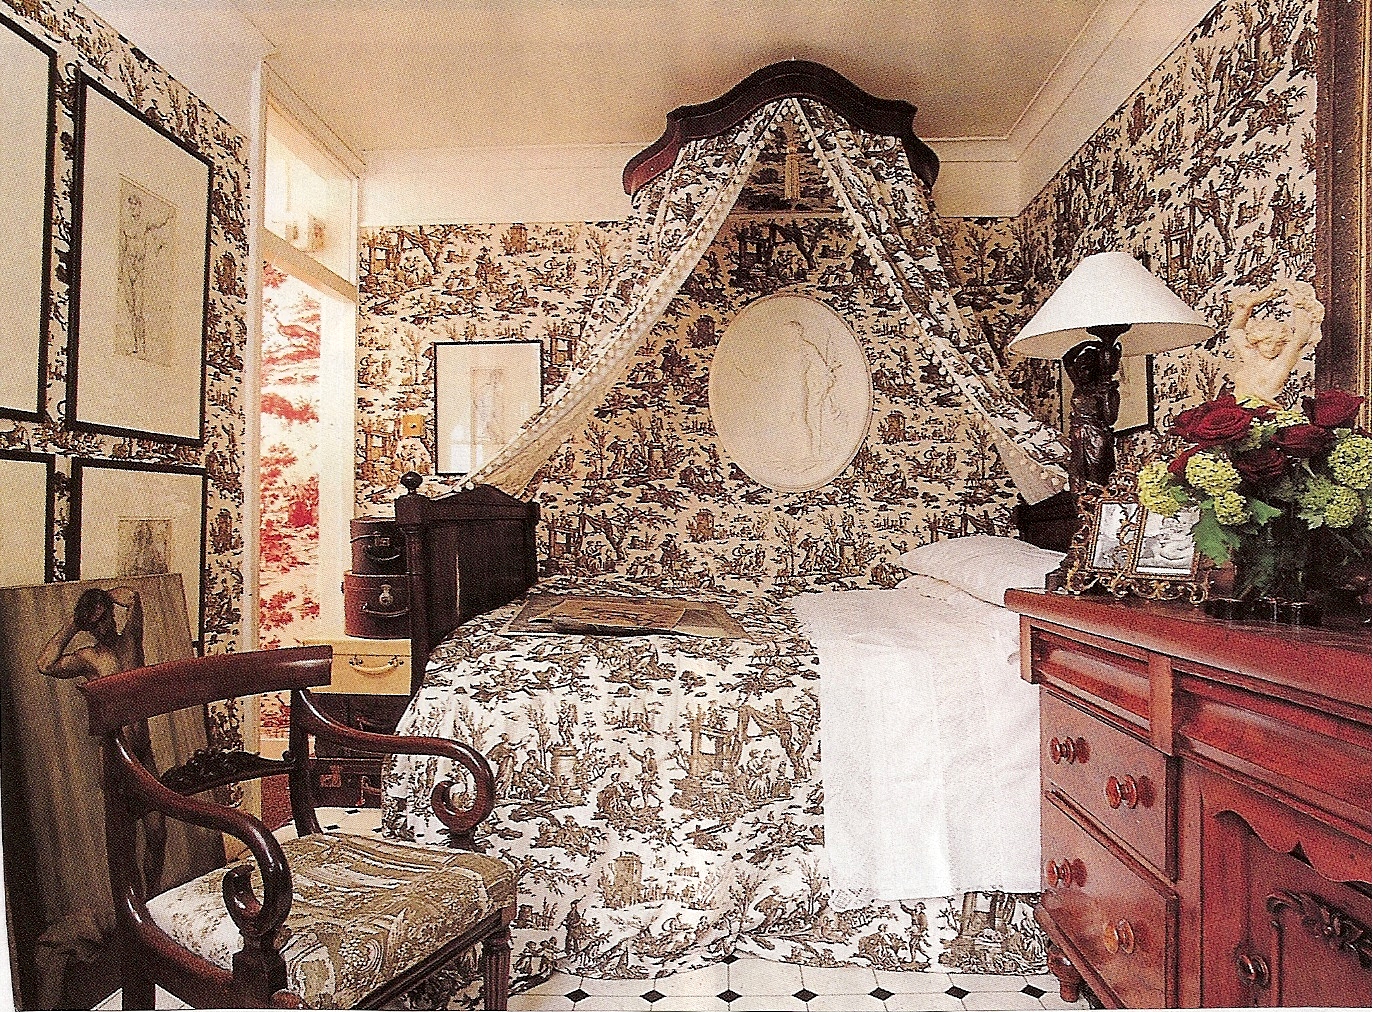 House Romance: The Enduring Charm of Toile de Jouy!